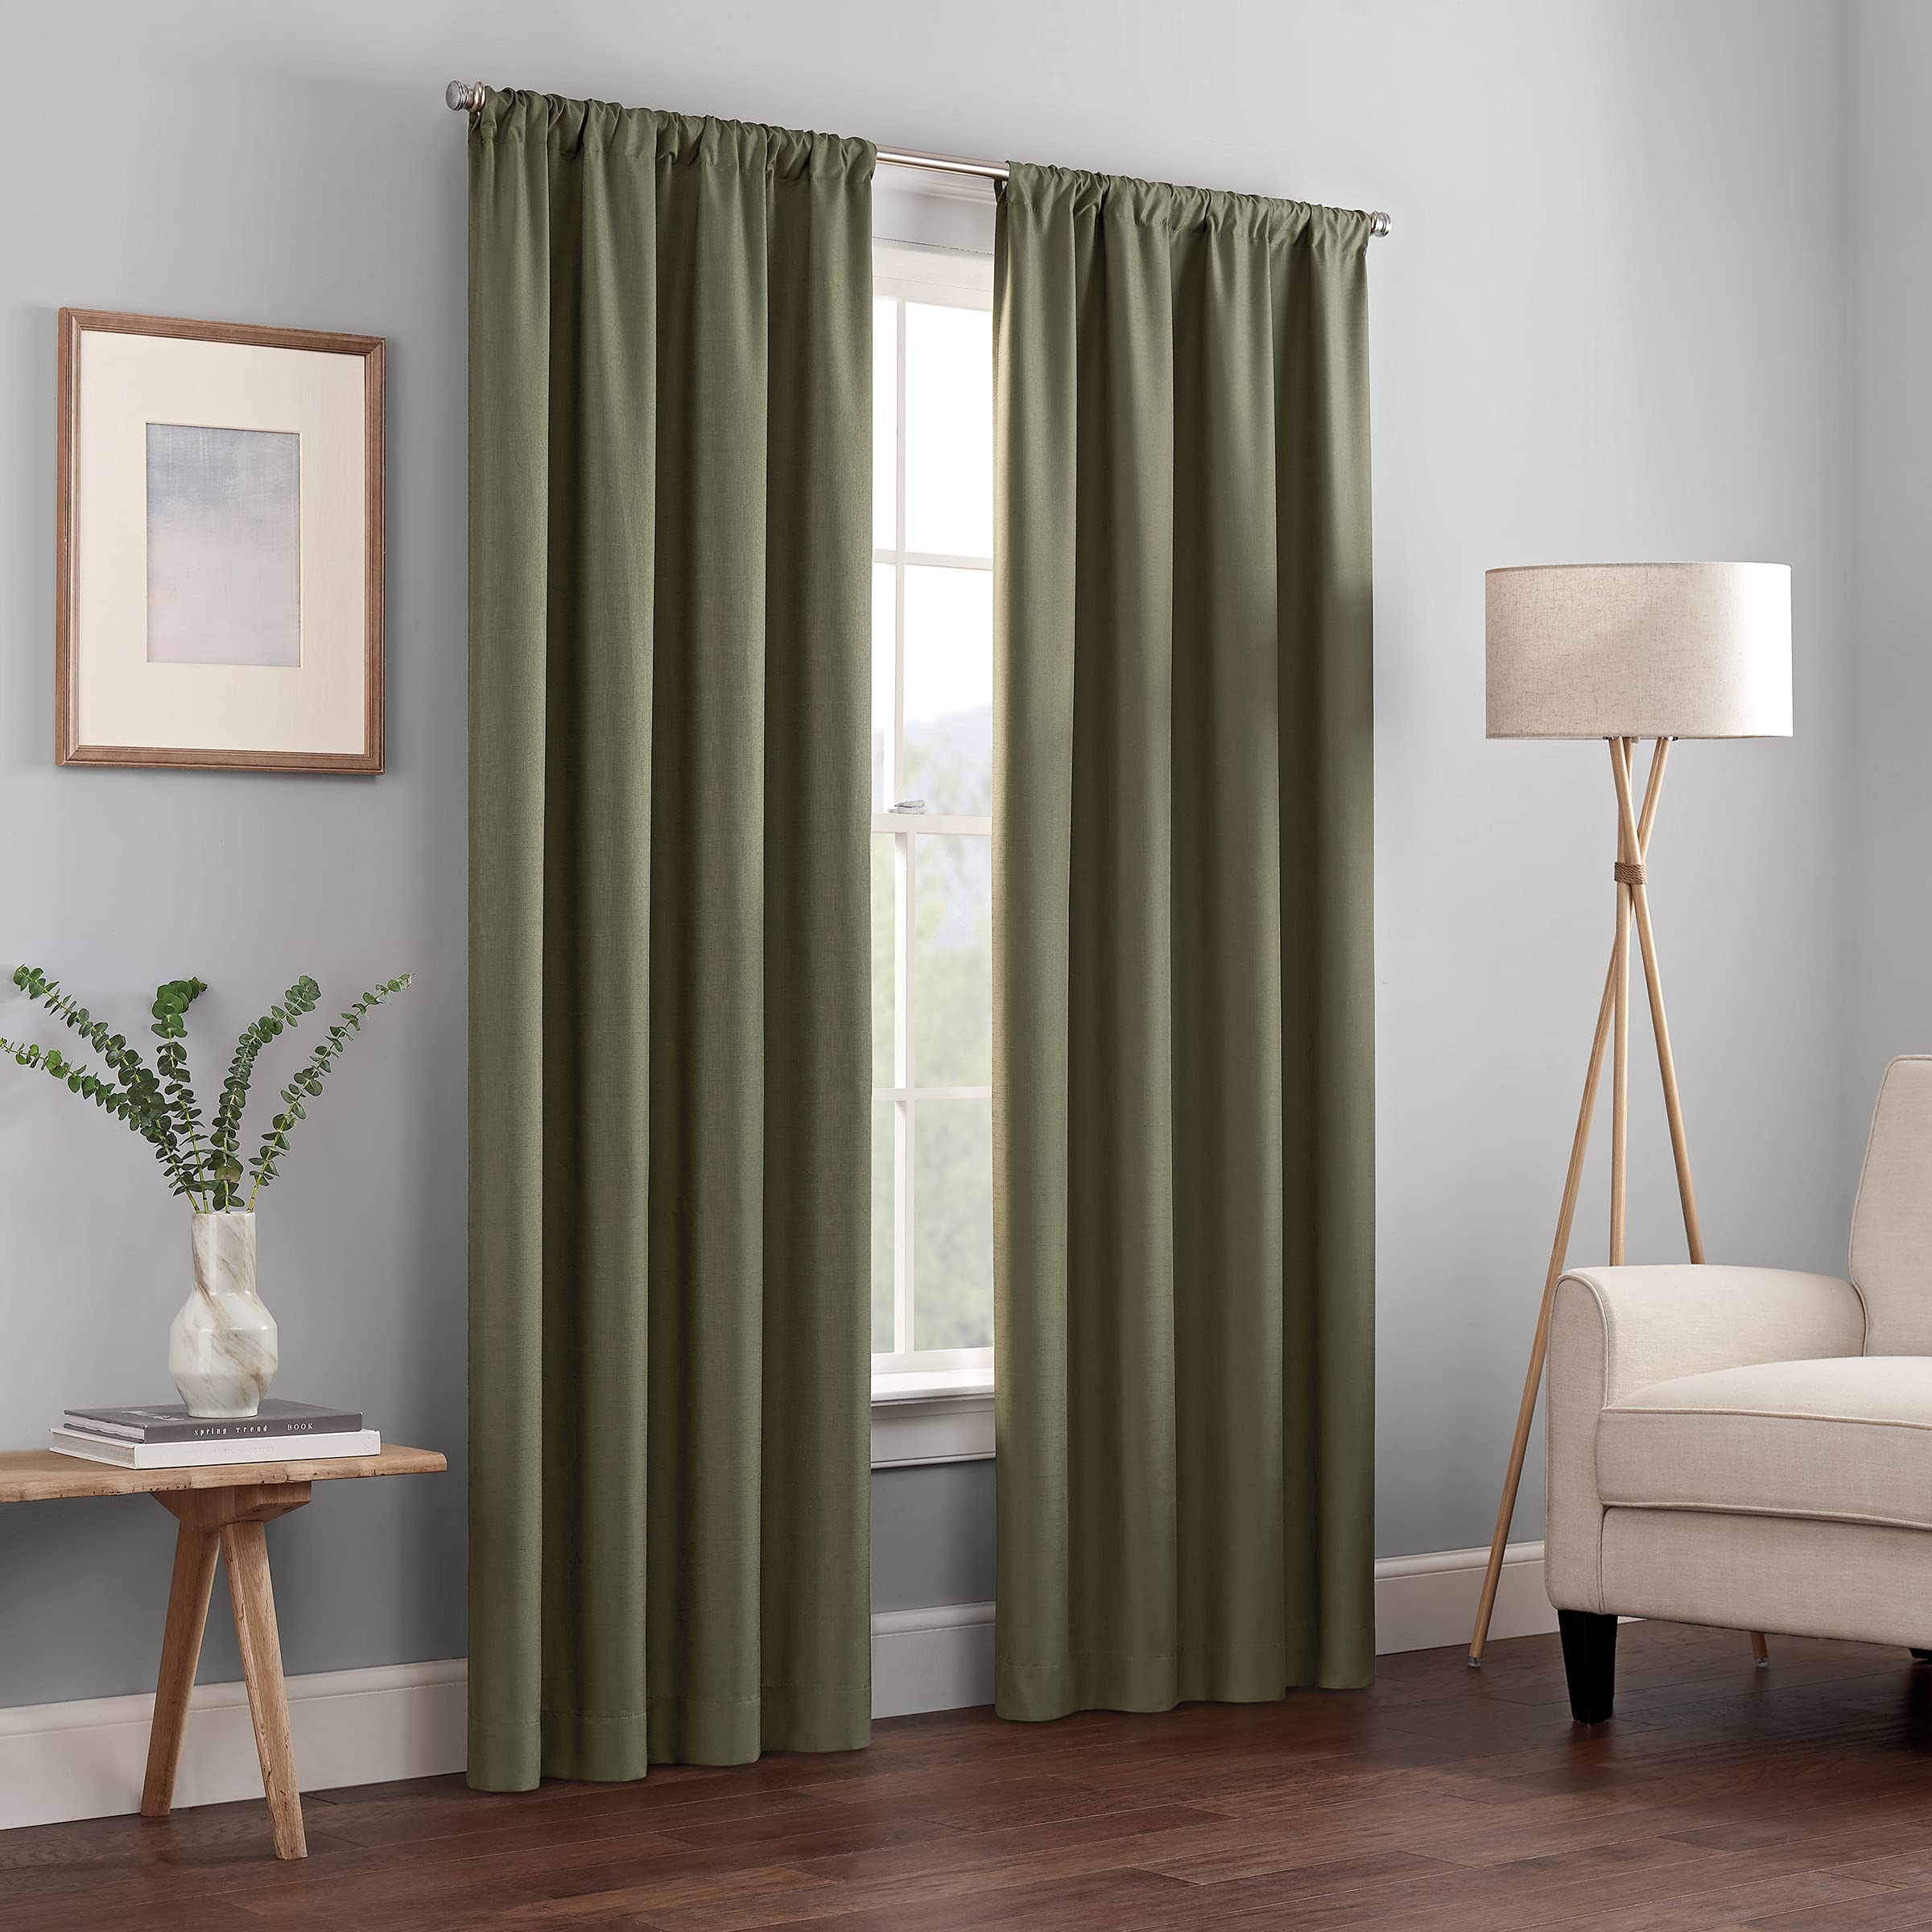 Eclipse Gum EcLIPSE Kendall Modern Blackout Thermal Rod Pocket Window curtain for Bedroom or Living Room (1 Panel), 42 in x 84 in, Artichoke